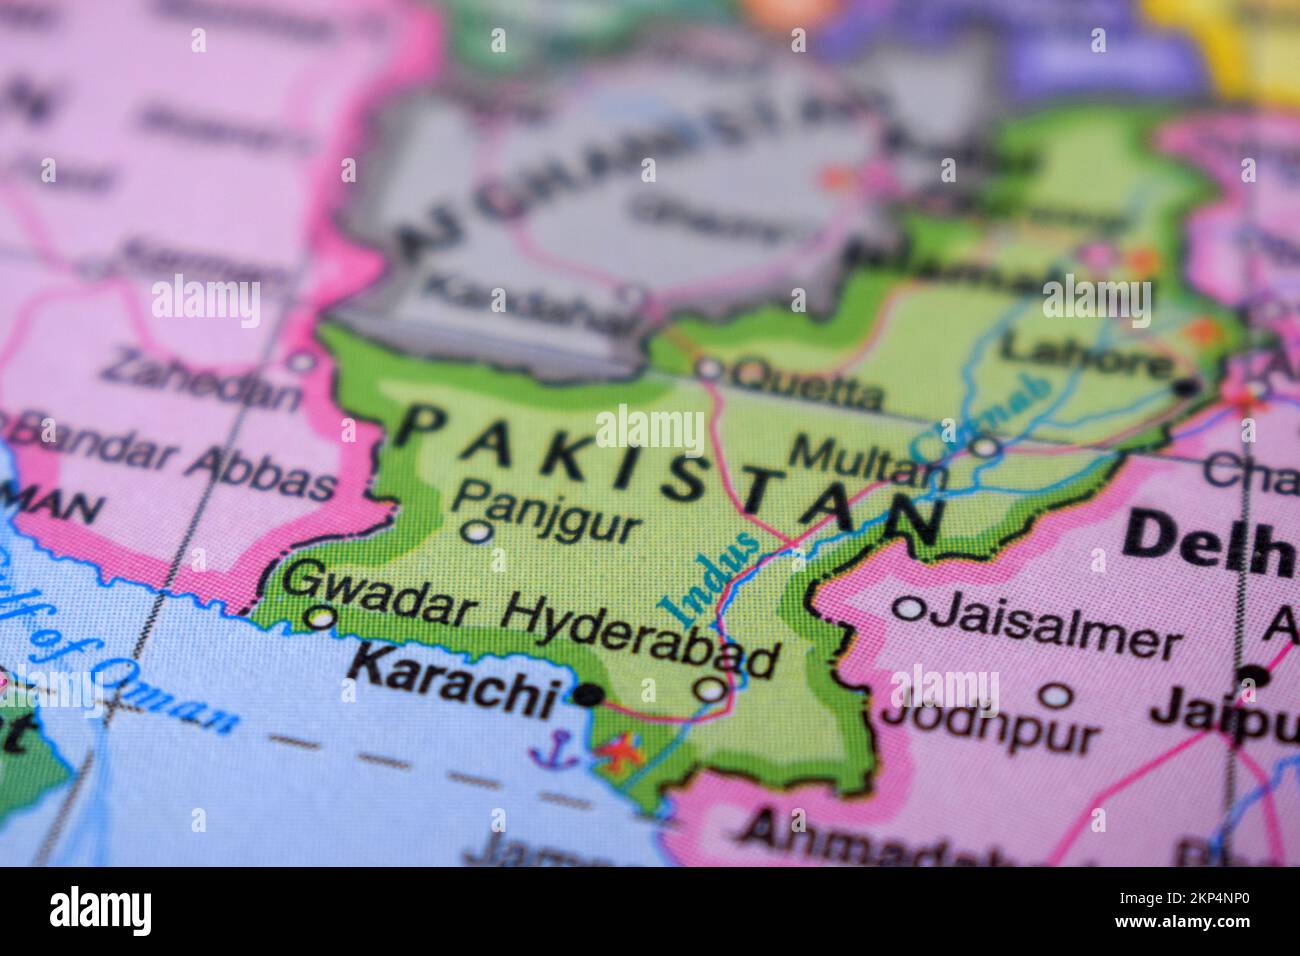 Pakistan Travel Concept Country Name On The Political World Map Very Macro Close-Up View Stock Photo